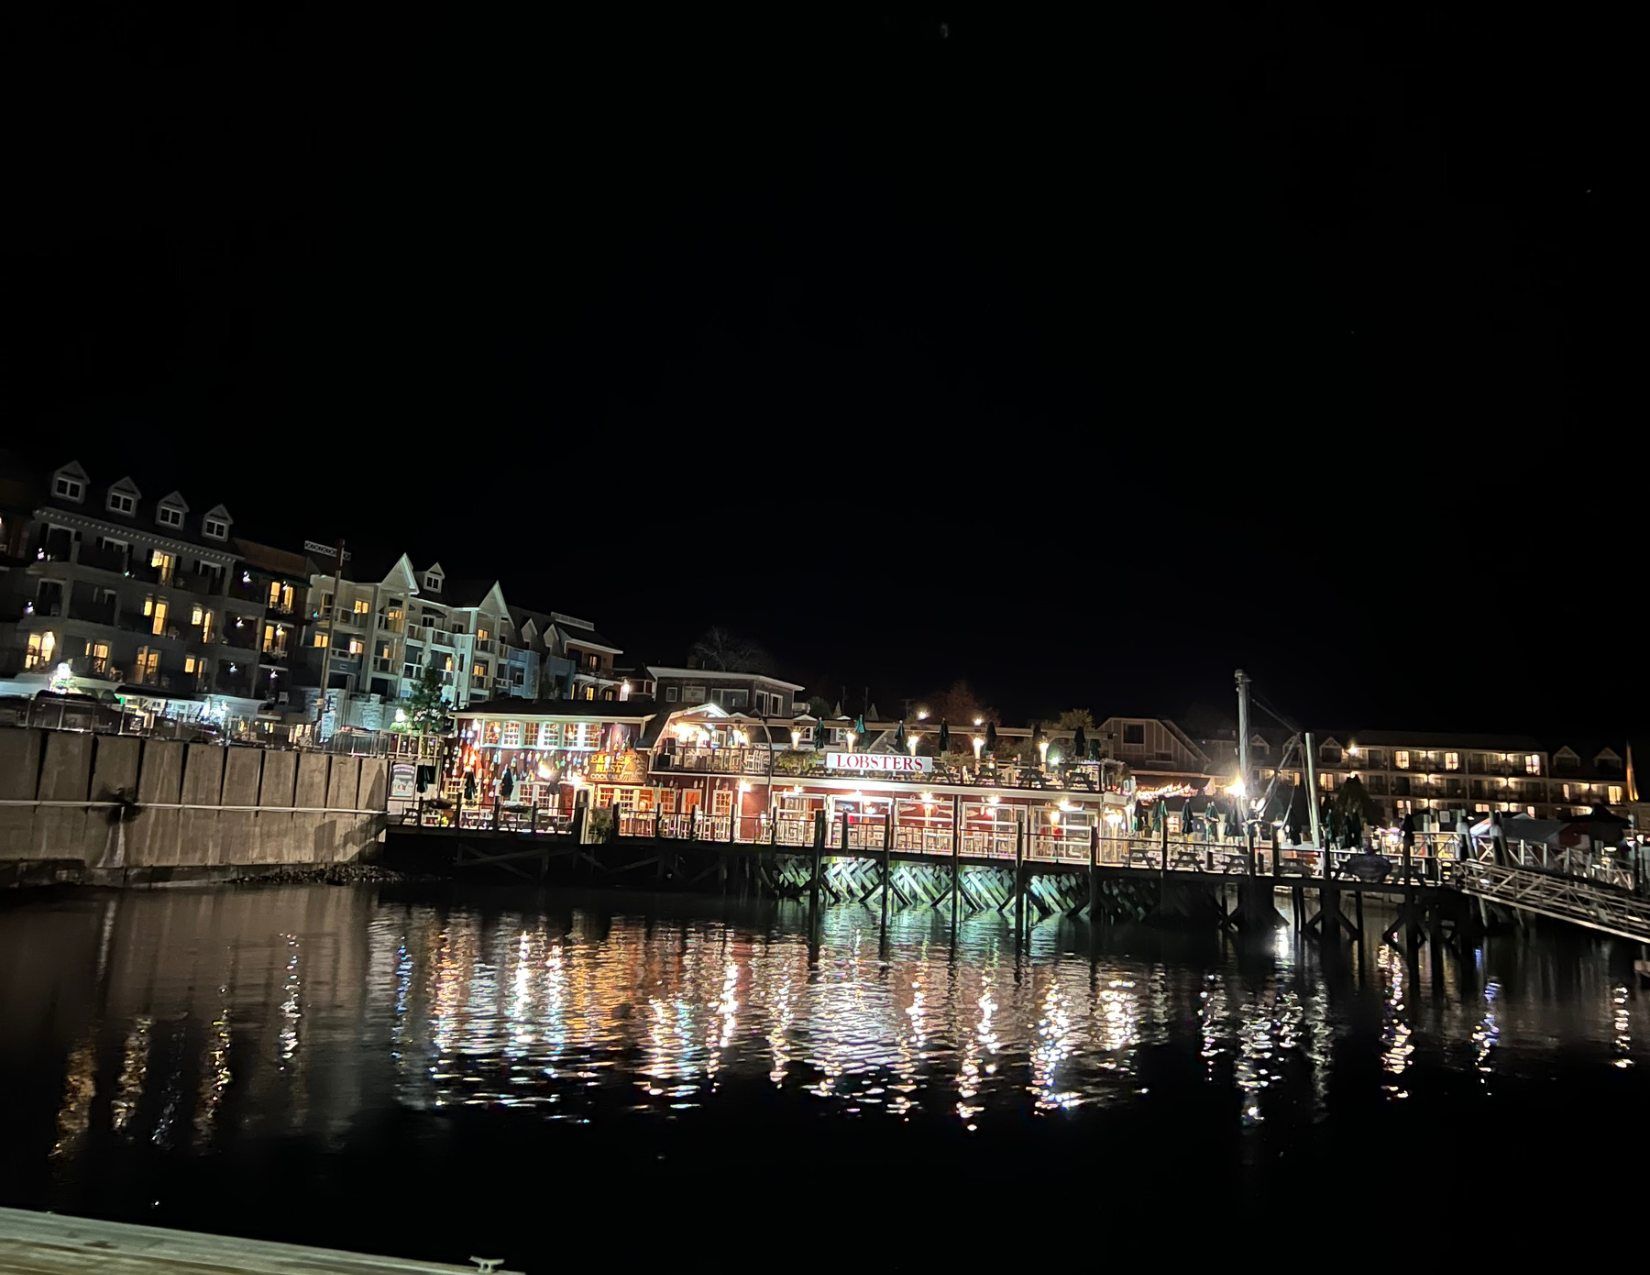 View of Bar Harbor at night, with lights from the businesses reflecting on the water.